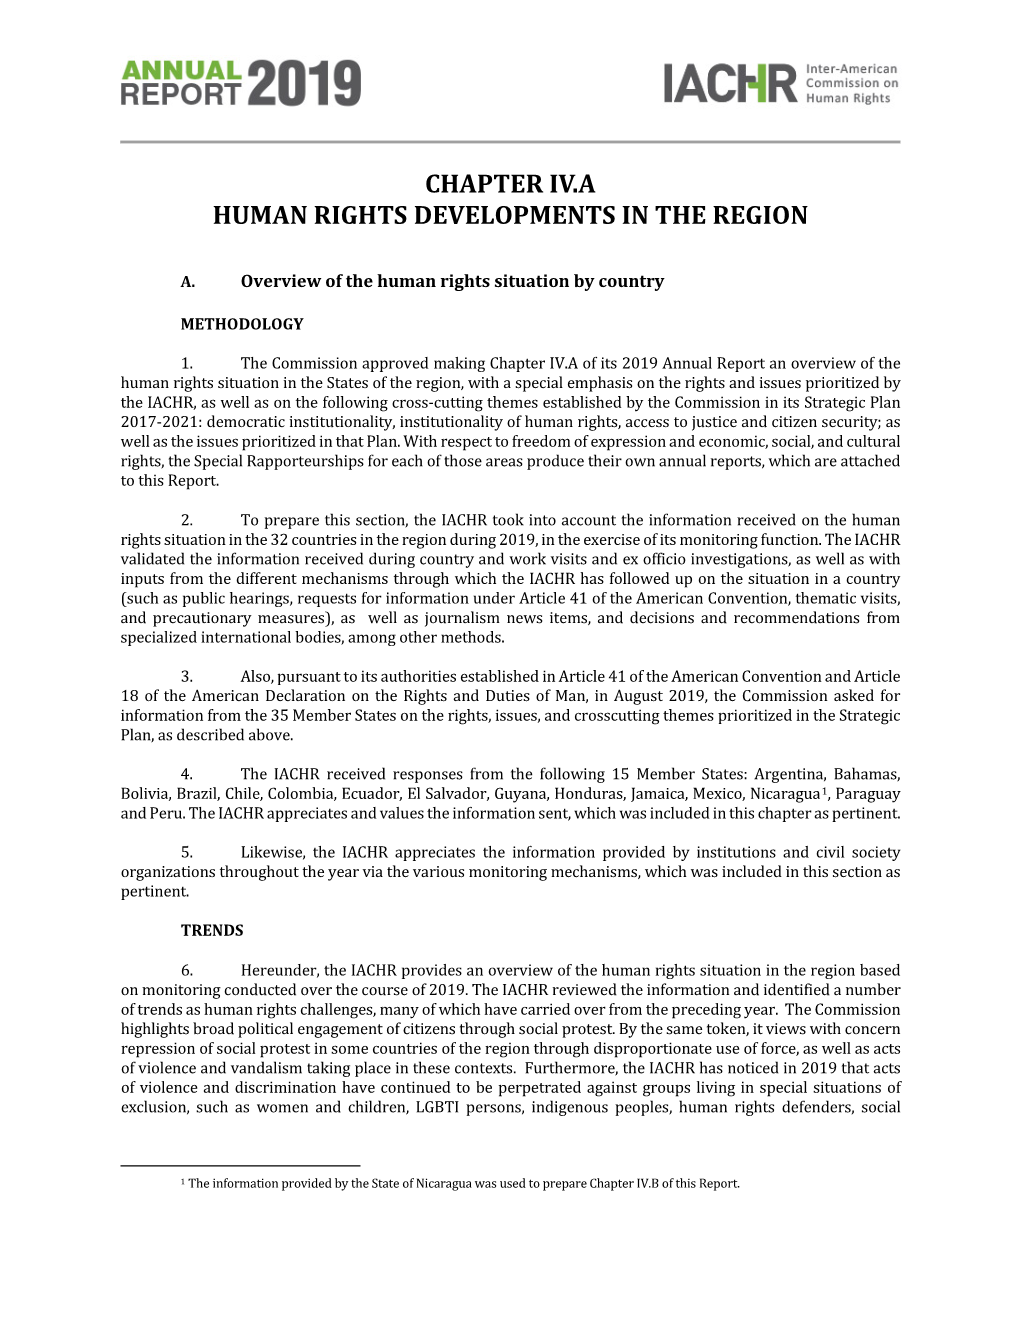 Chapter IV Human Rights Developments in the Region